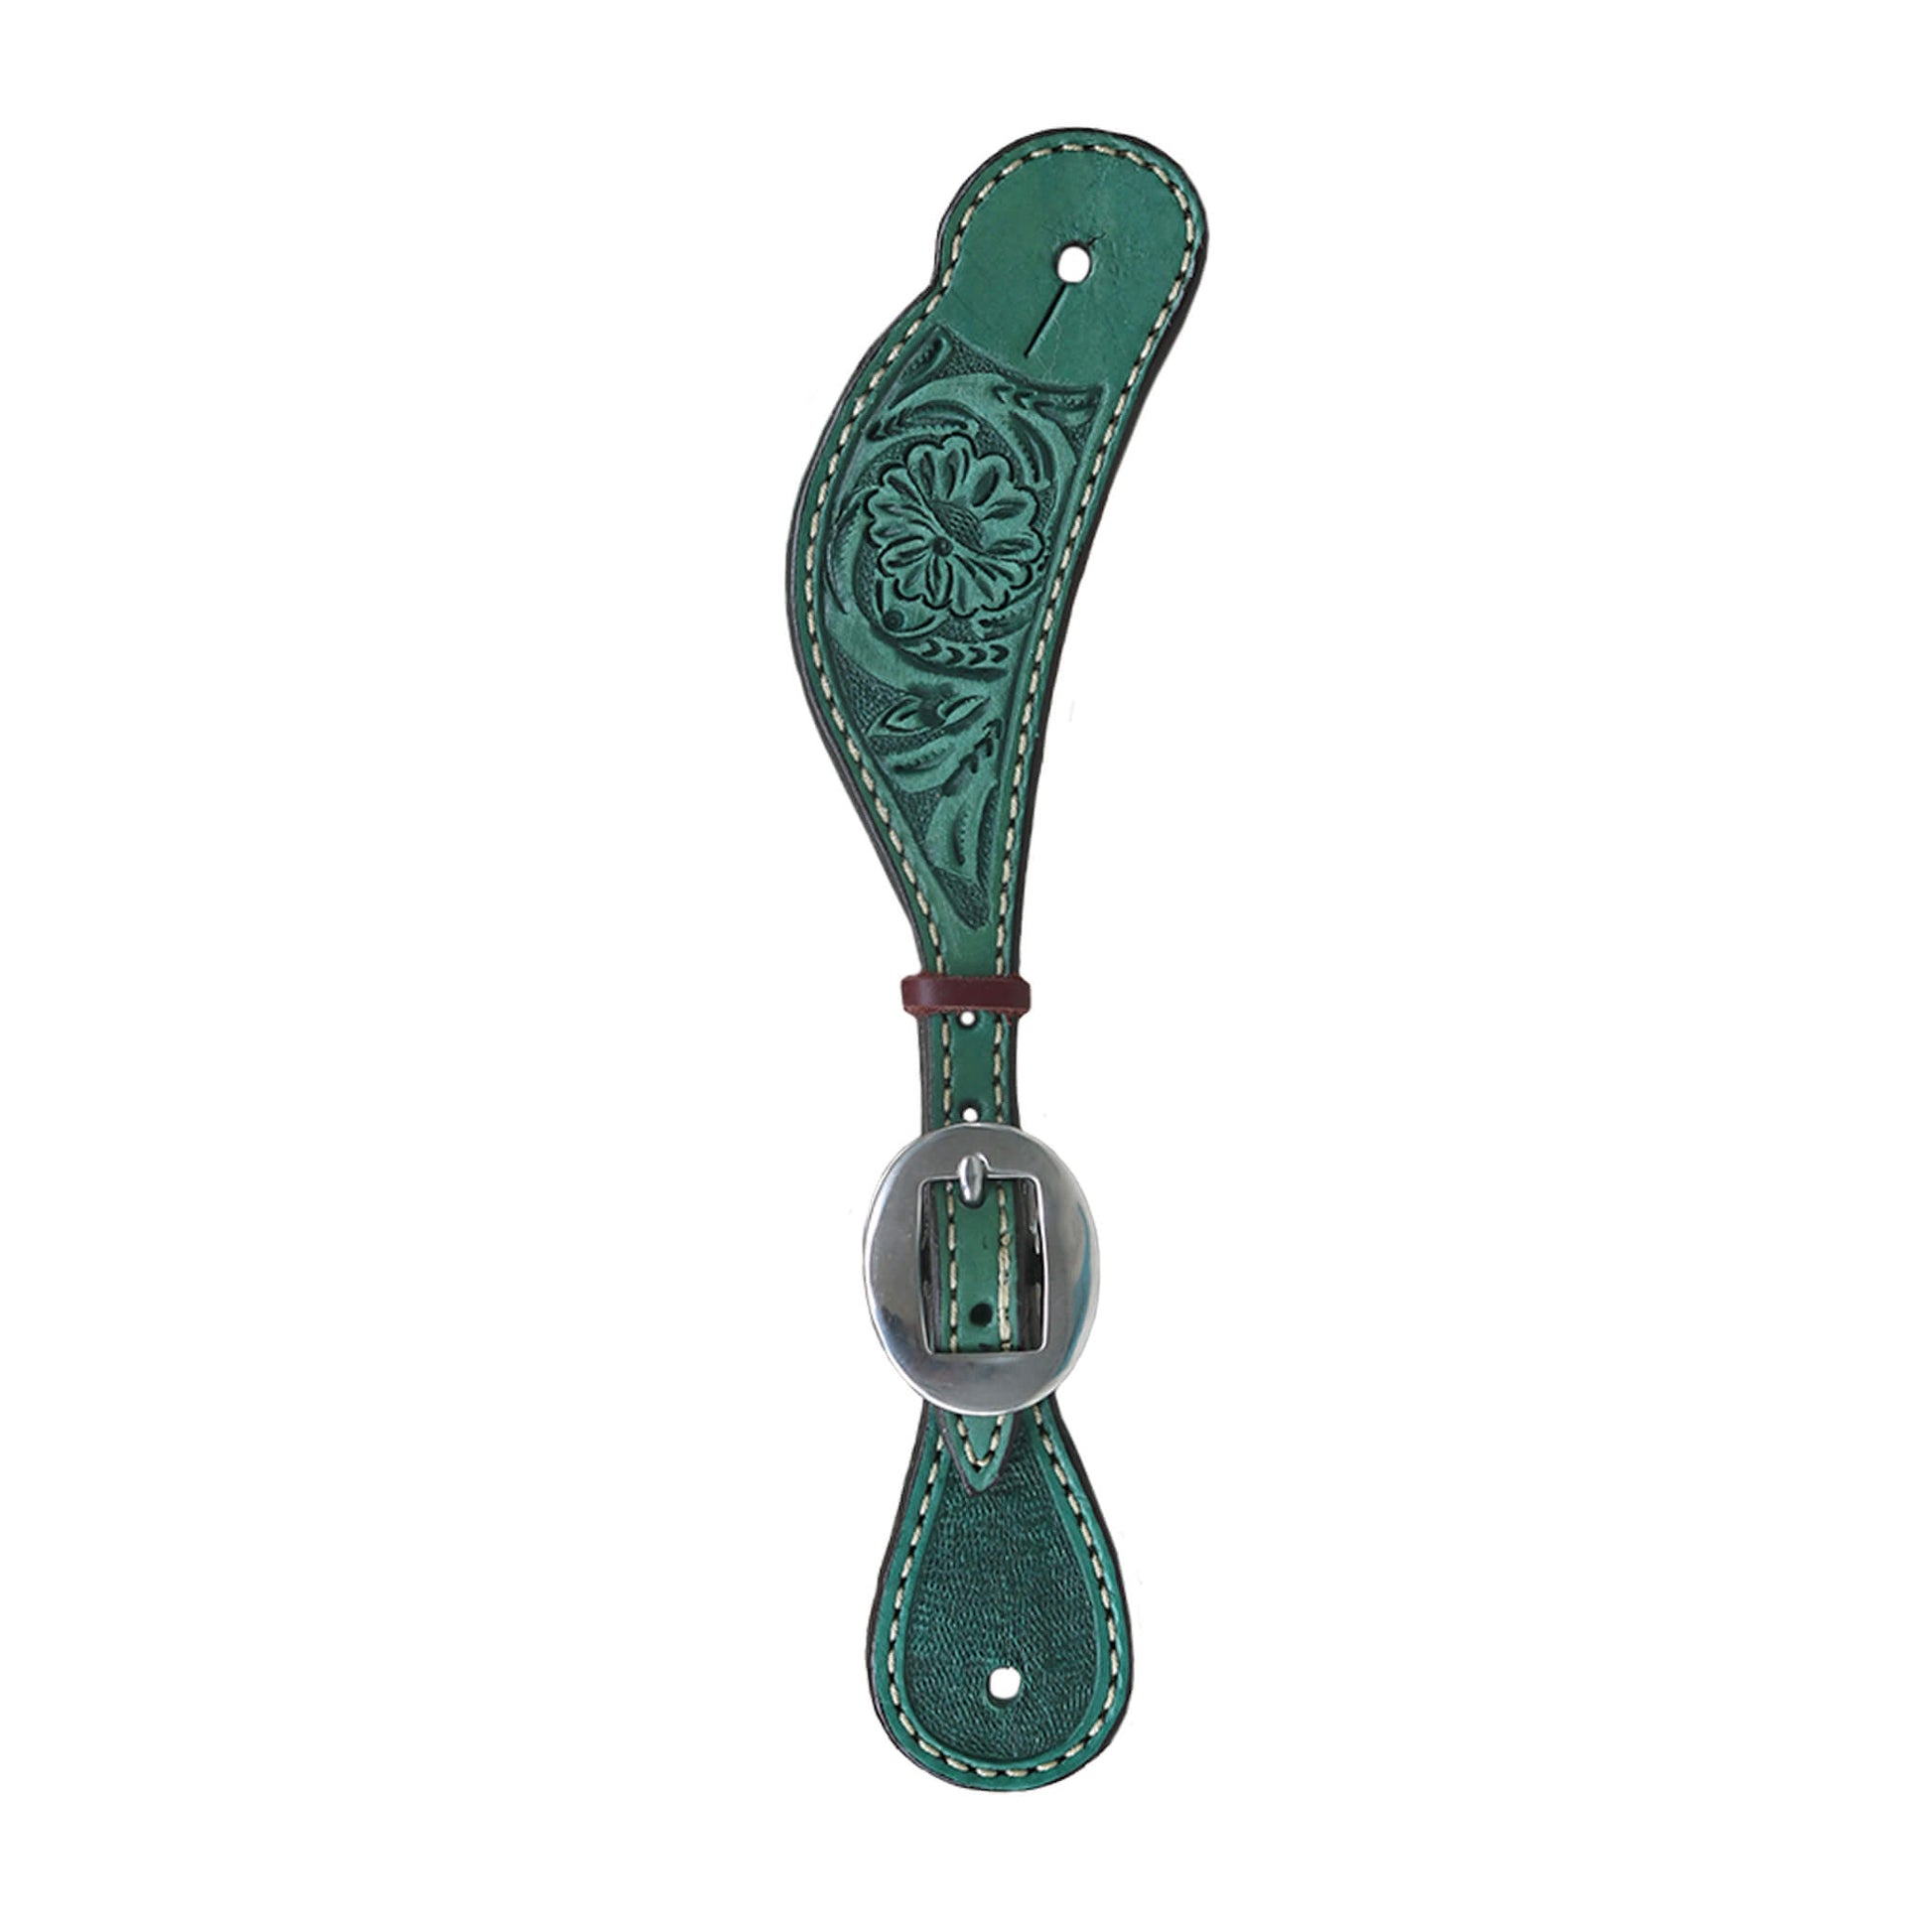 Ladies spur straps rough out turquoise leather floral tooled. (Color may vary)